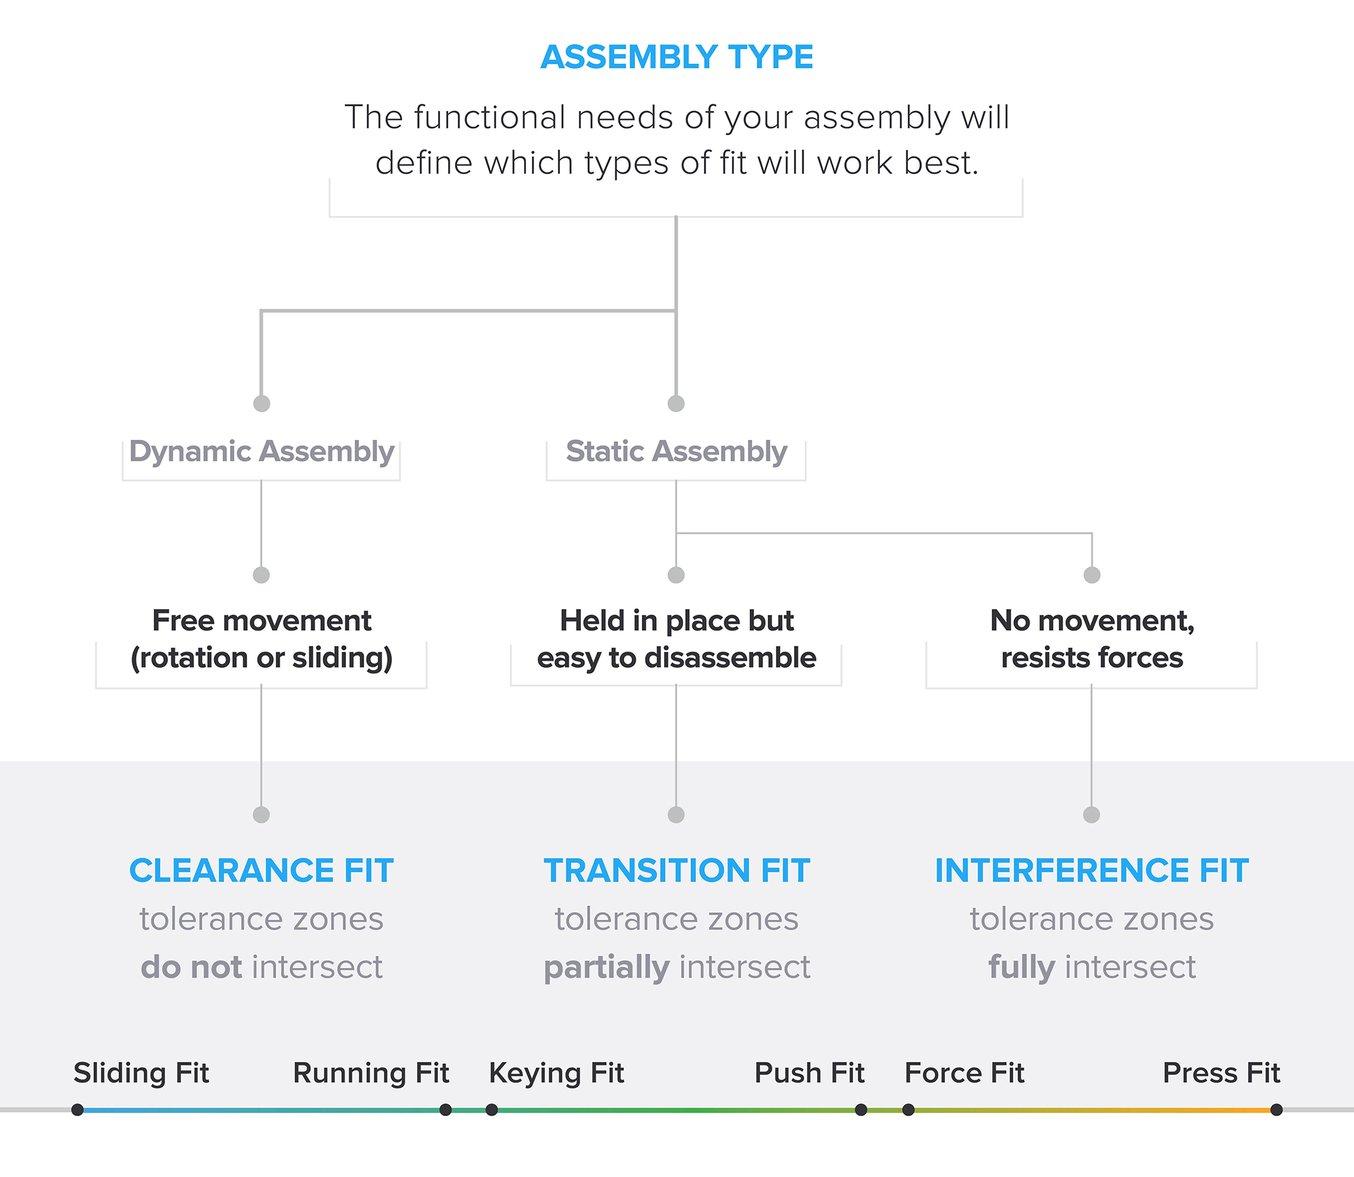 Engineering fit can be divided into three types: clearance, transition, and interference. Each of the these types of fit can then be broken down into two major subcategories.